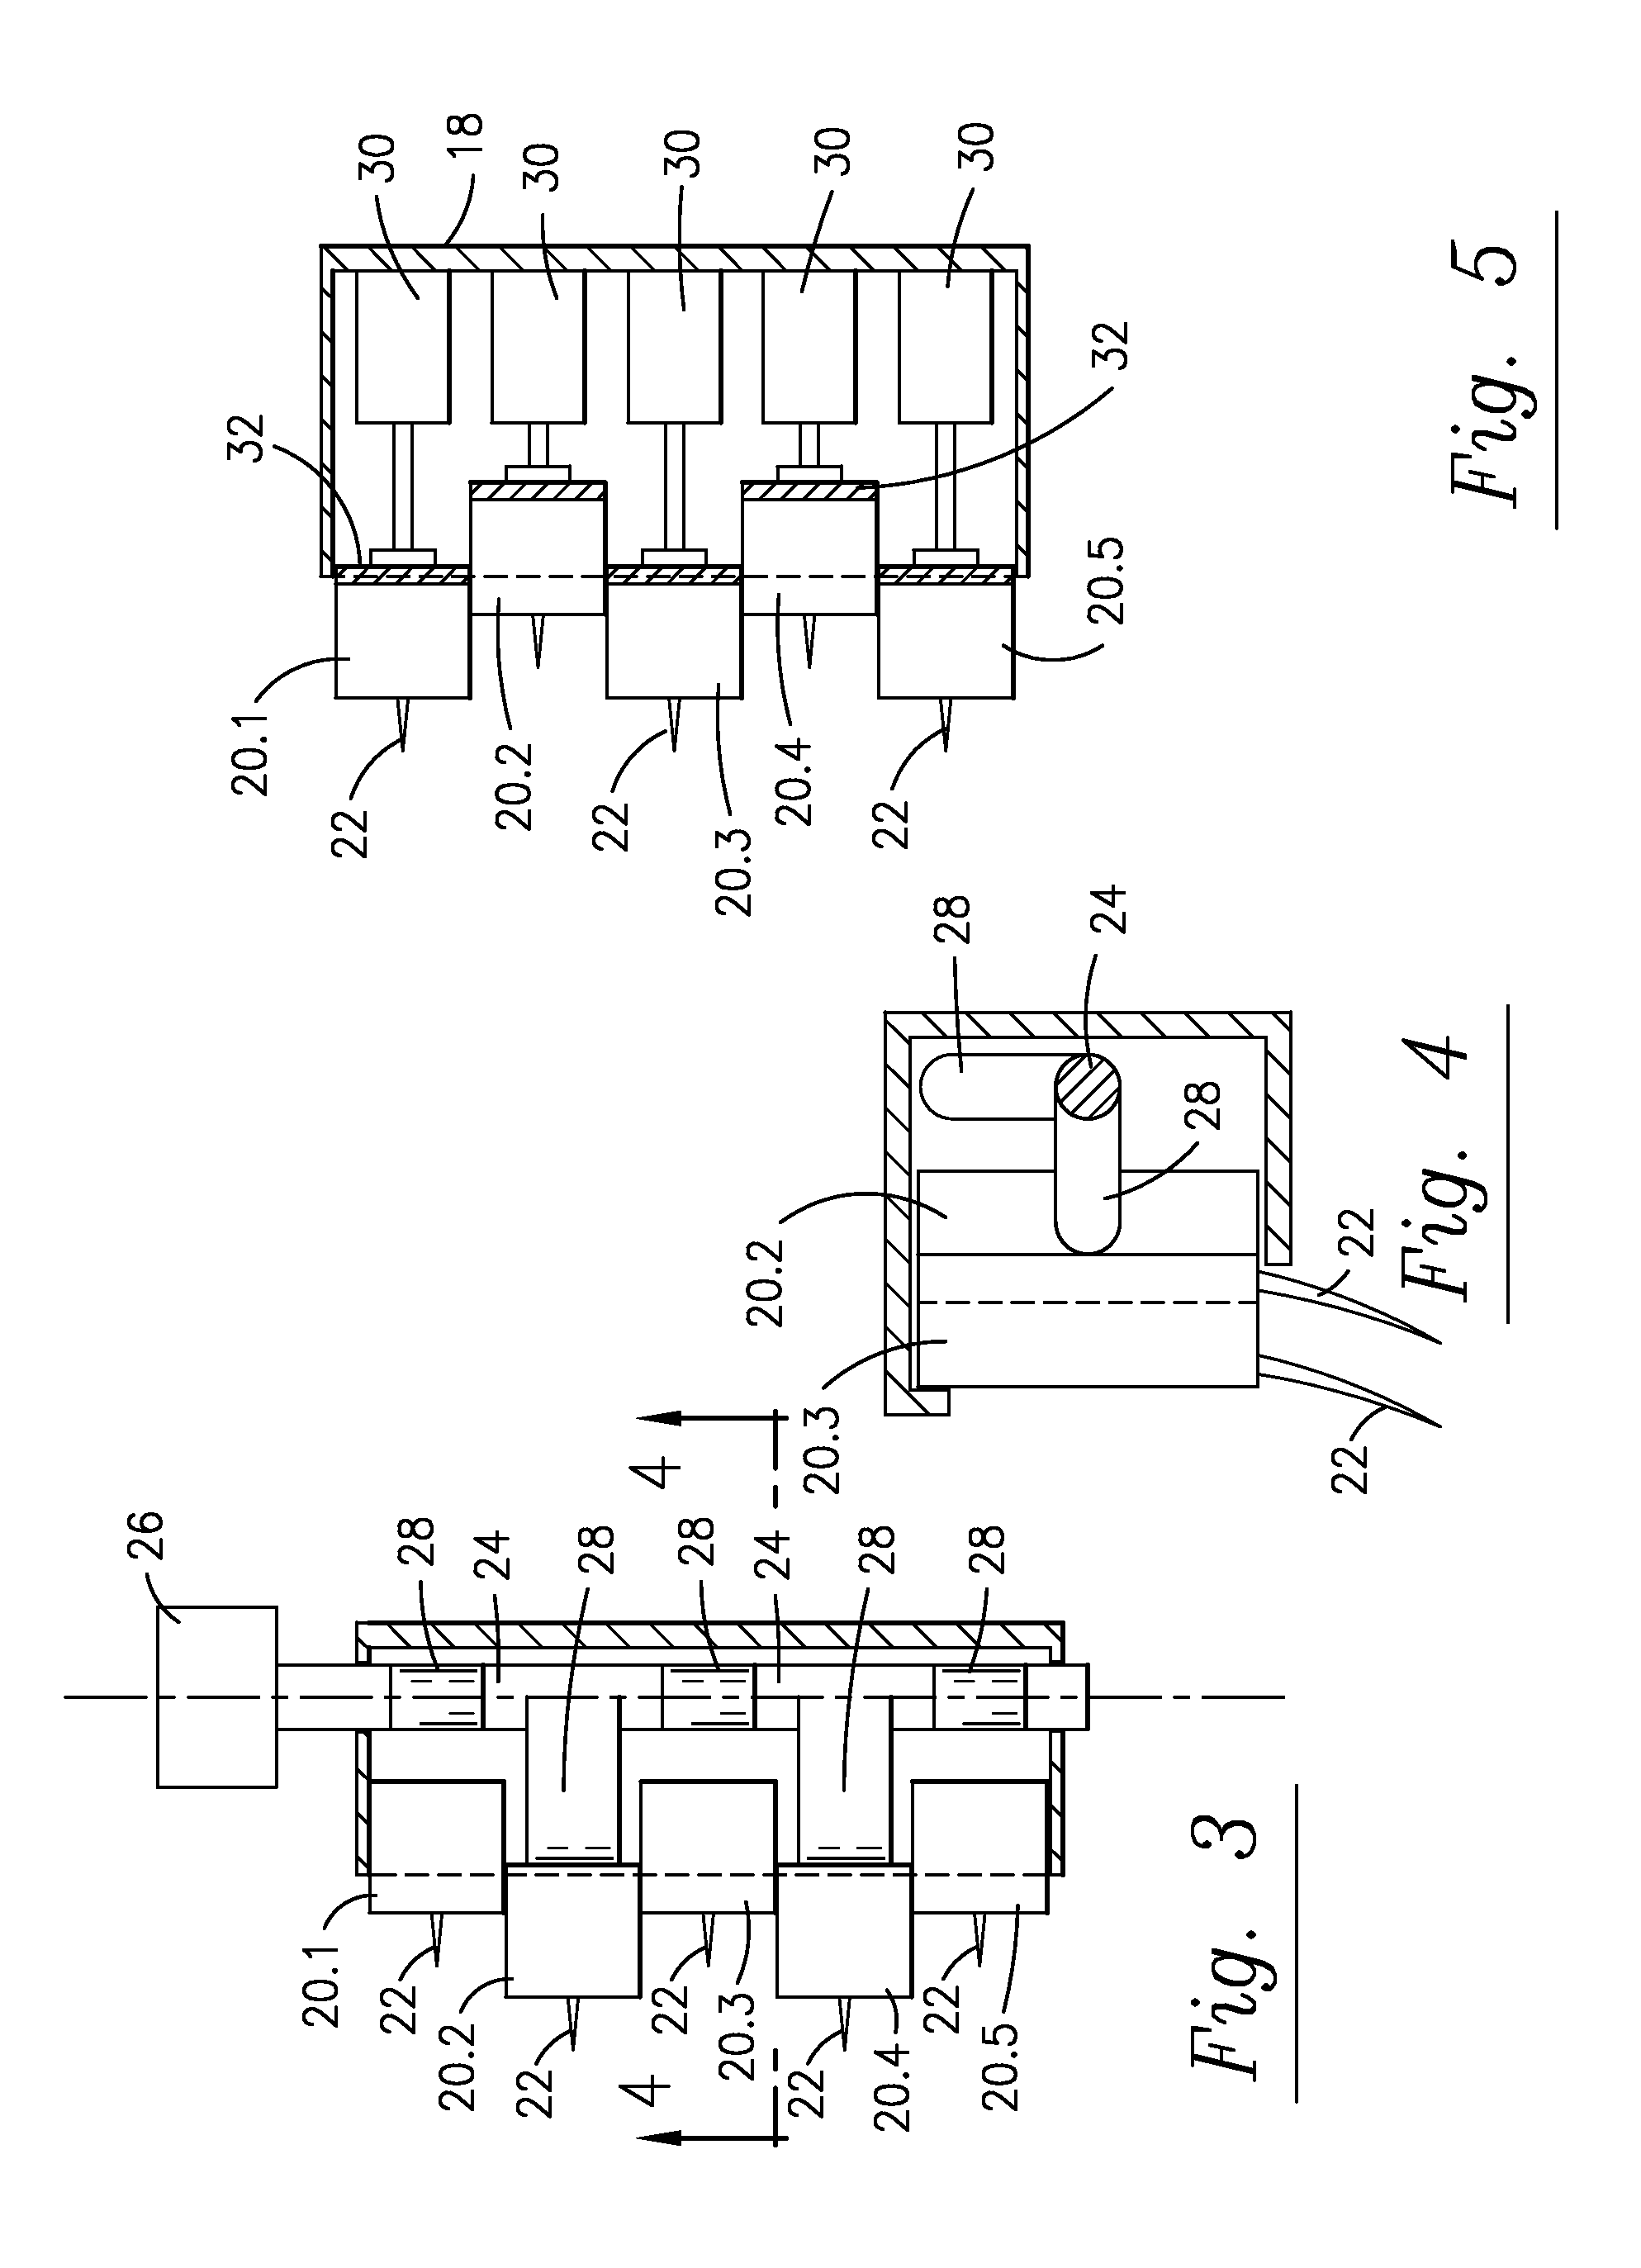 Process and instrument for stretching tissue of skin